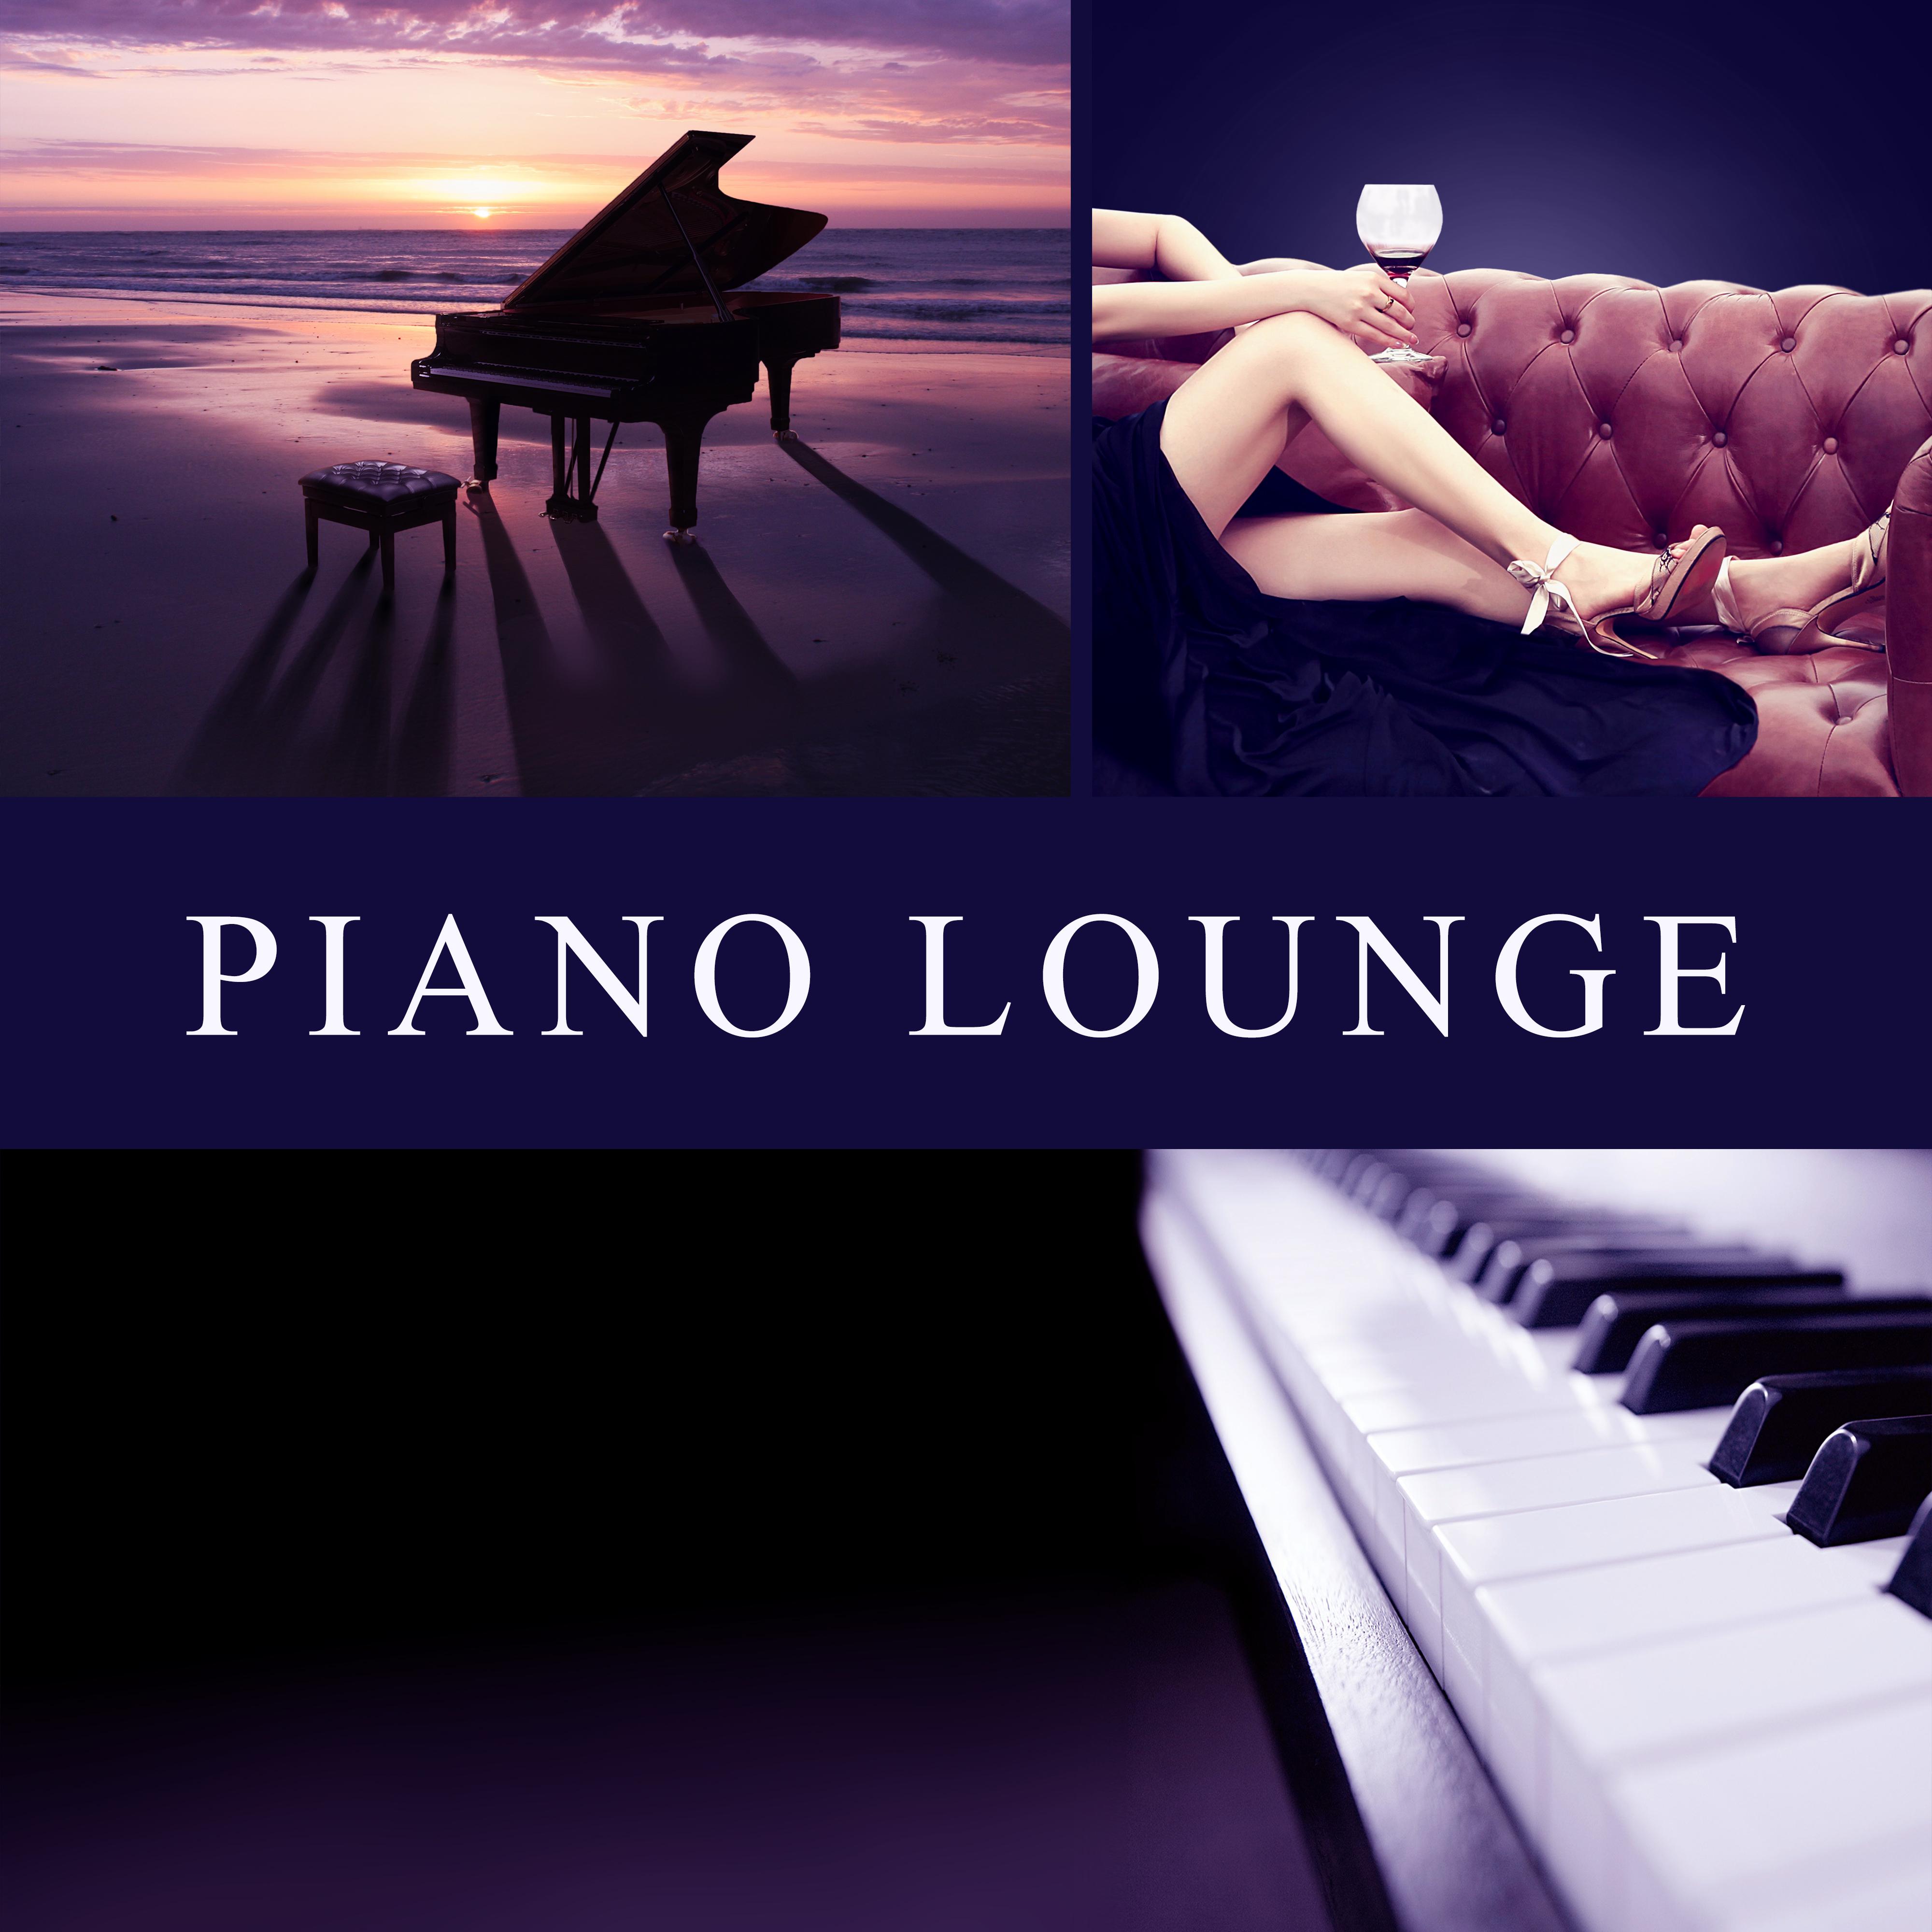 Piano Lounge – Smooth Jazz Music, Chilled Jazz, Piano Relaxation, Peaceful Jazz, Pure Mind, Calm Down, Stress Free